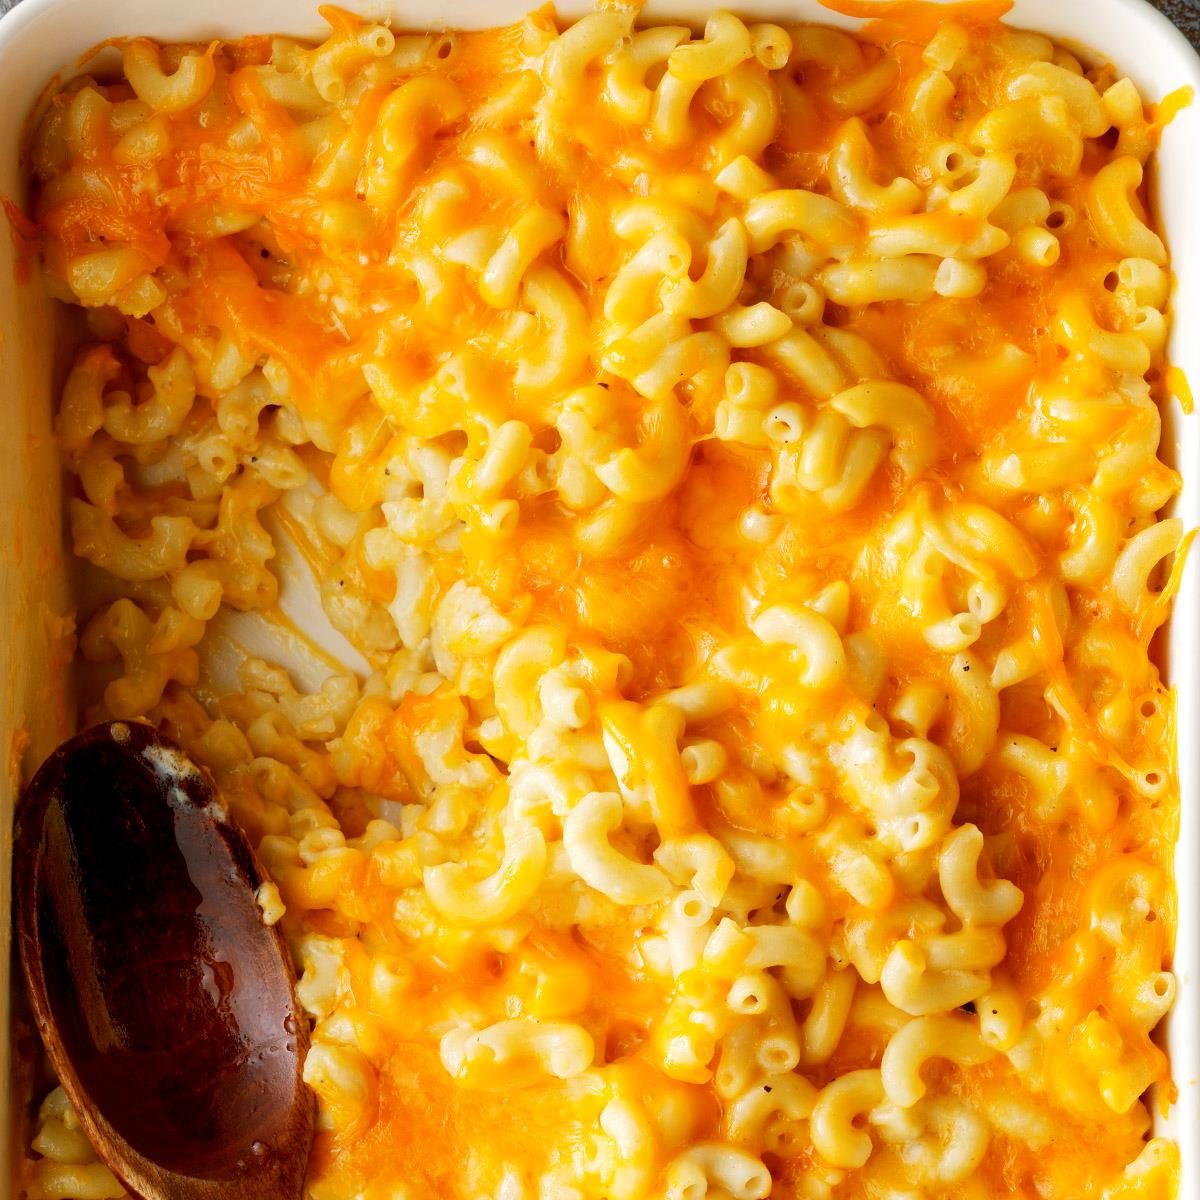 Old fashioned macaroni and cheese